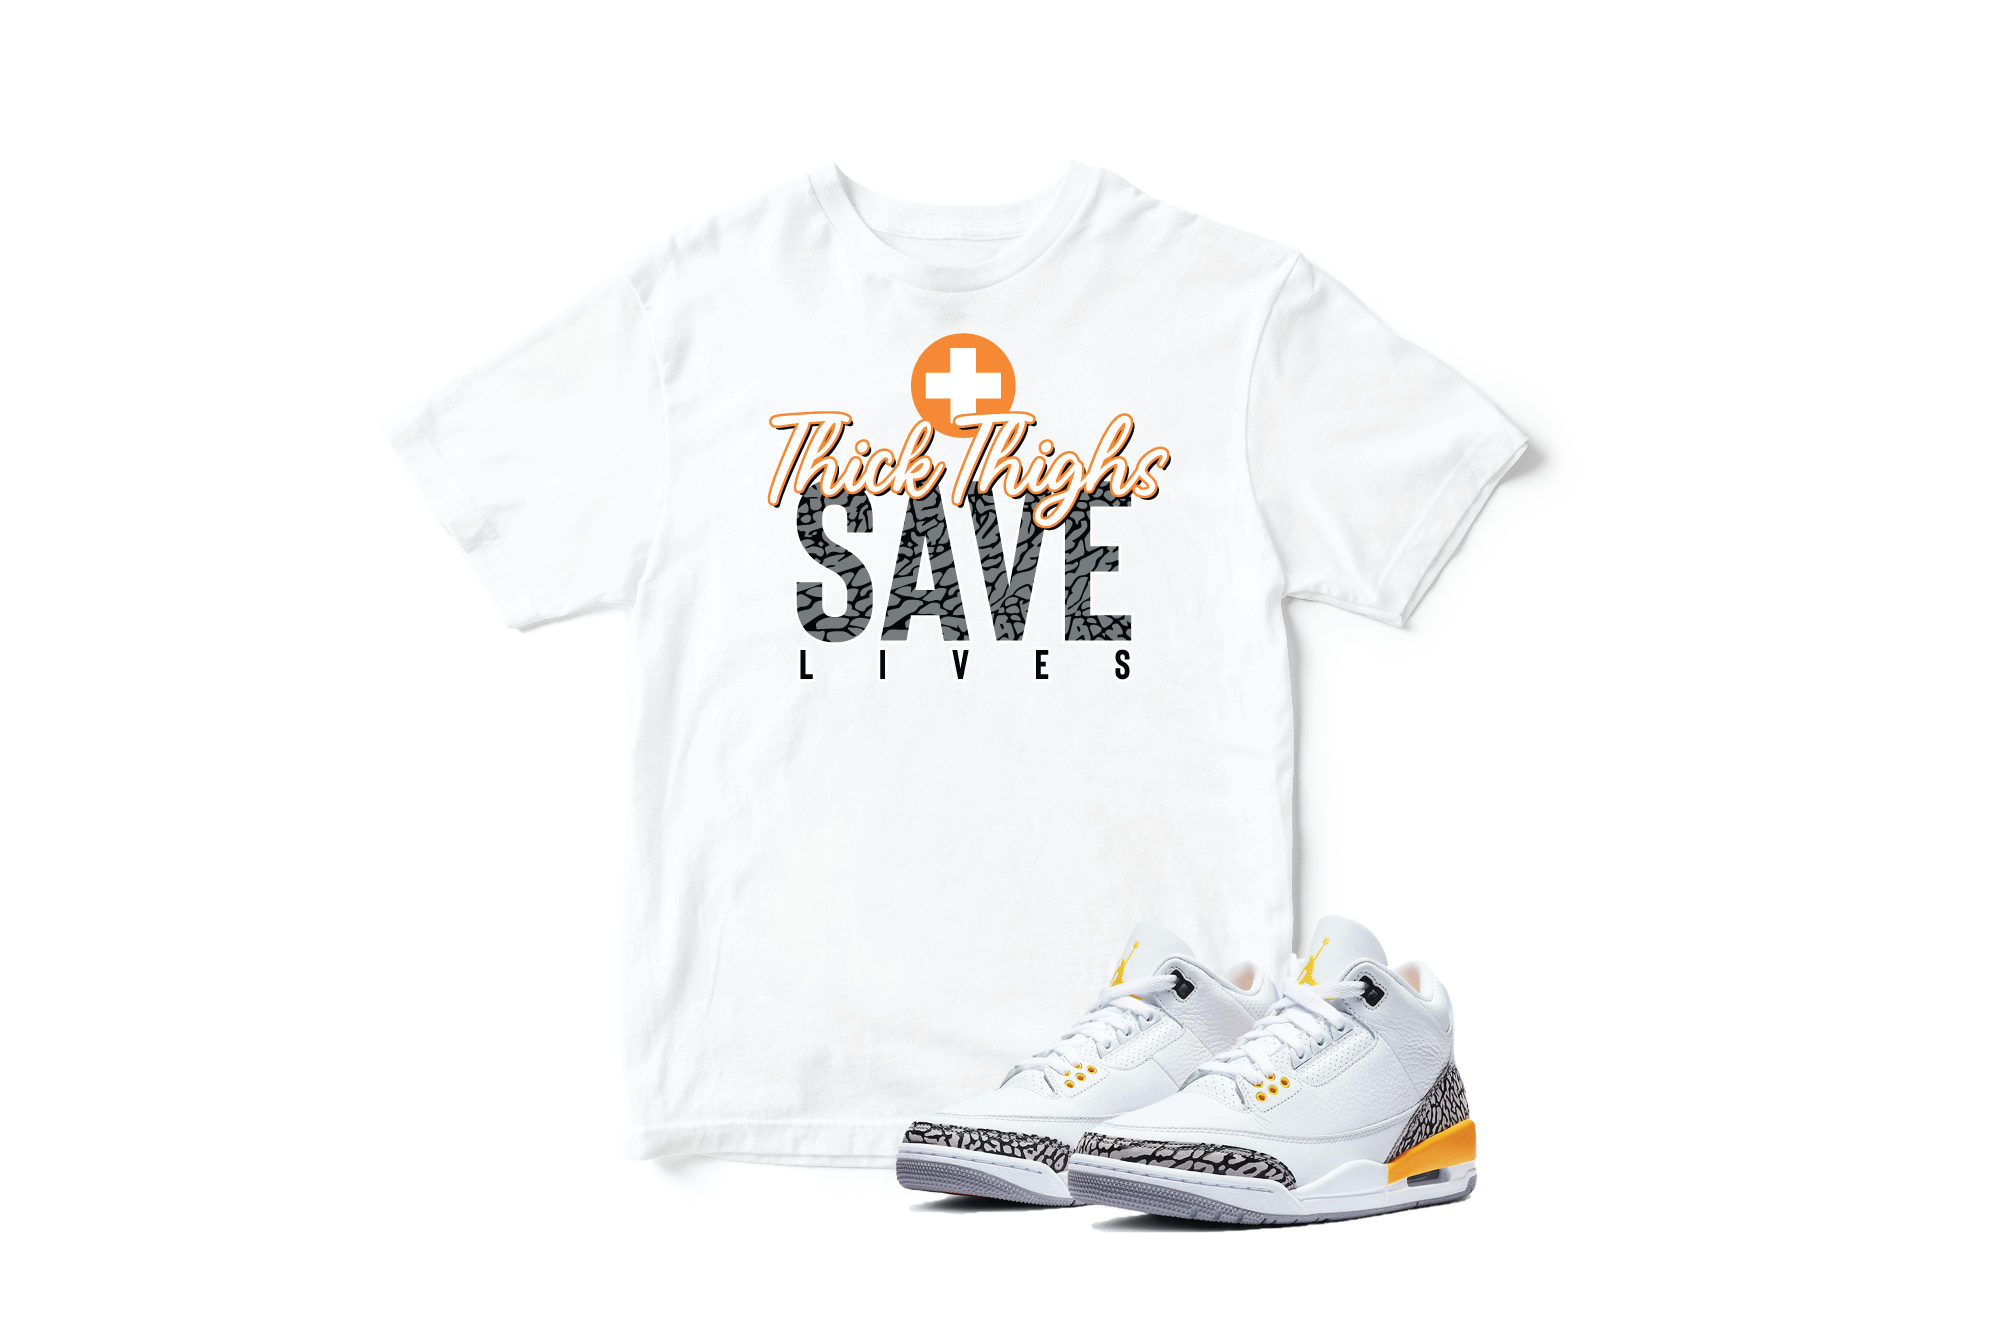 'Thick Thighs Save Lives' in Laser Orange CW Short Sleeve Tee